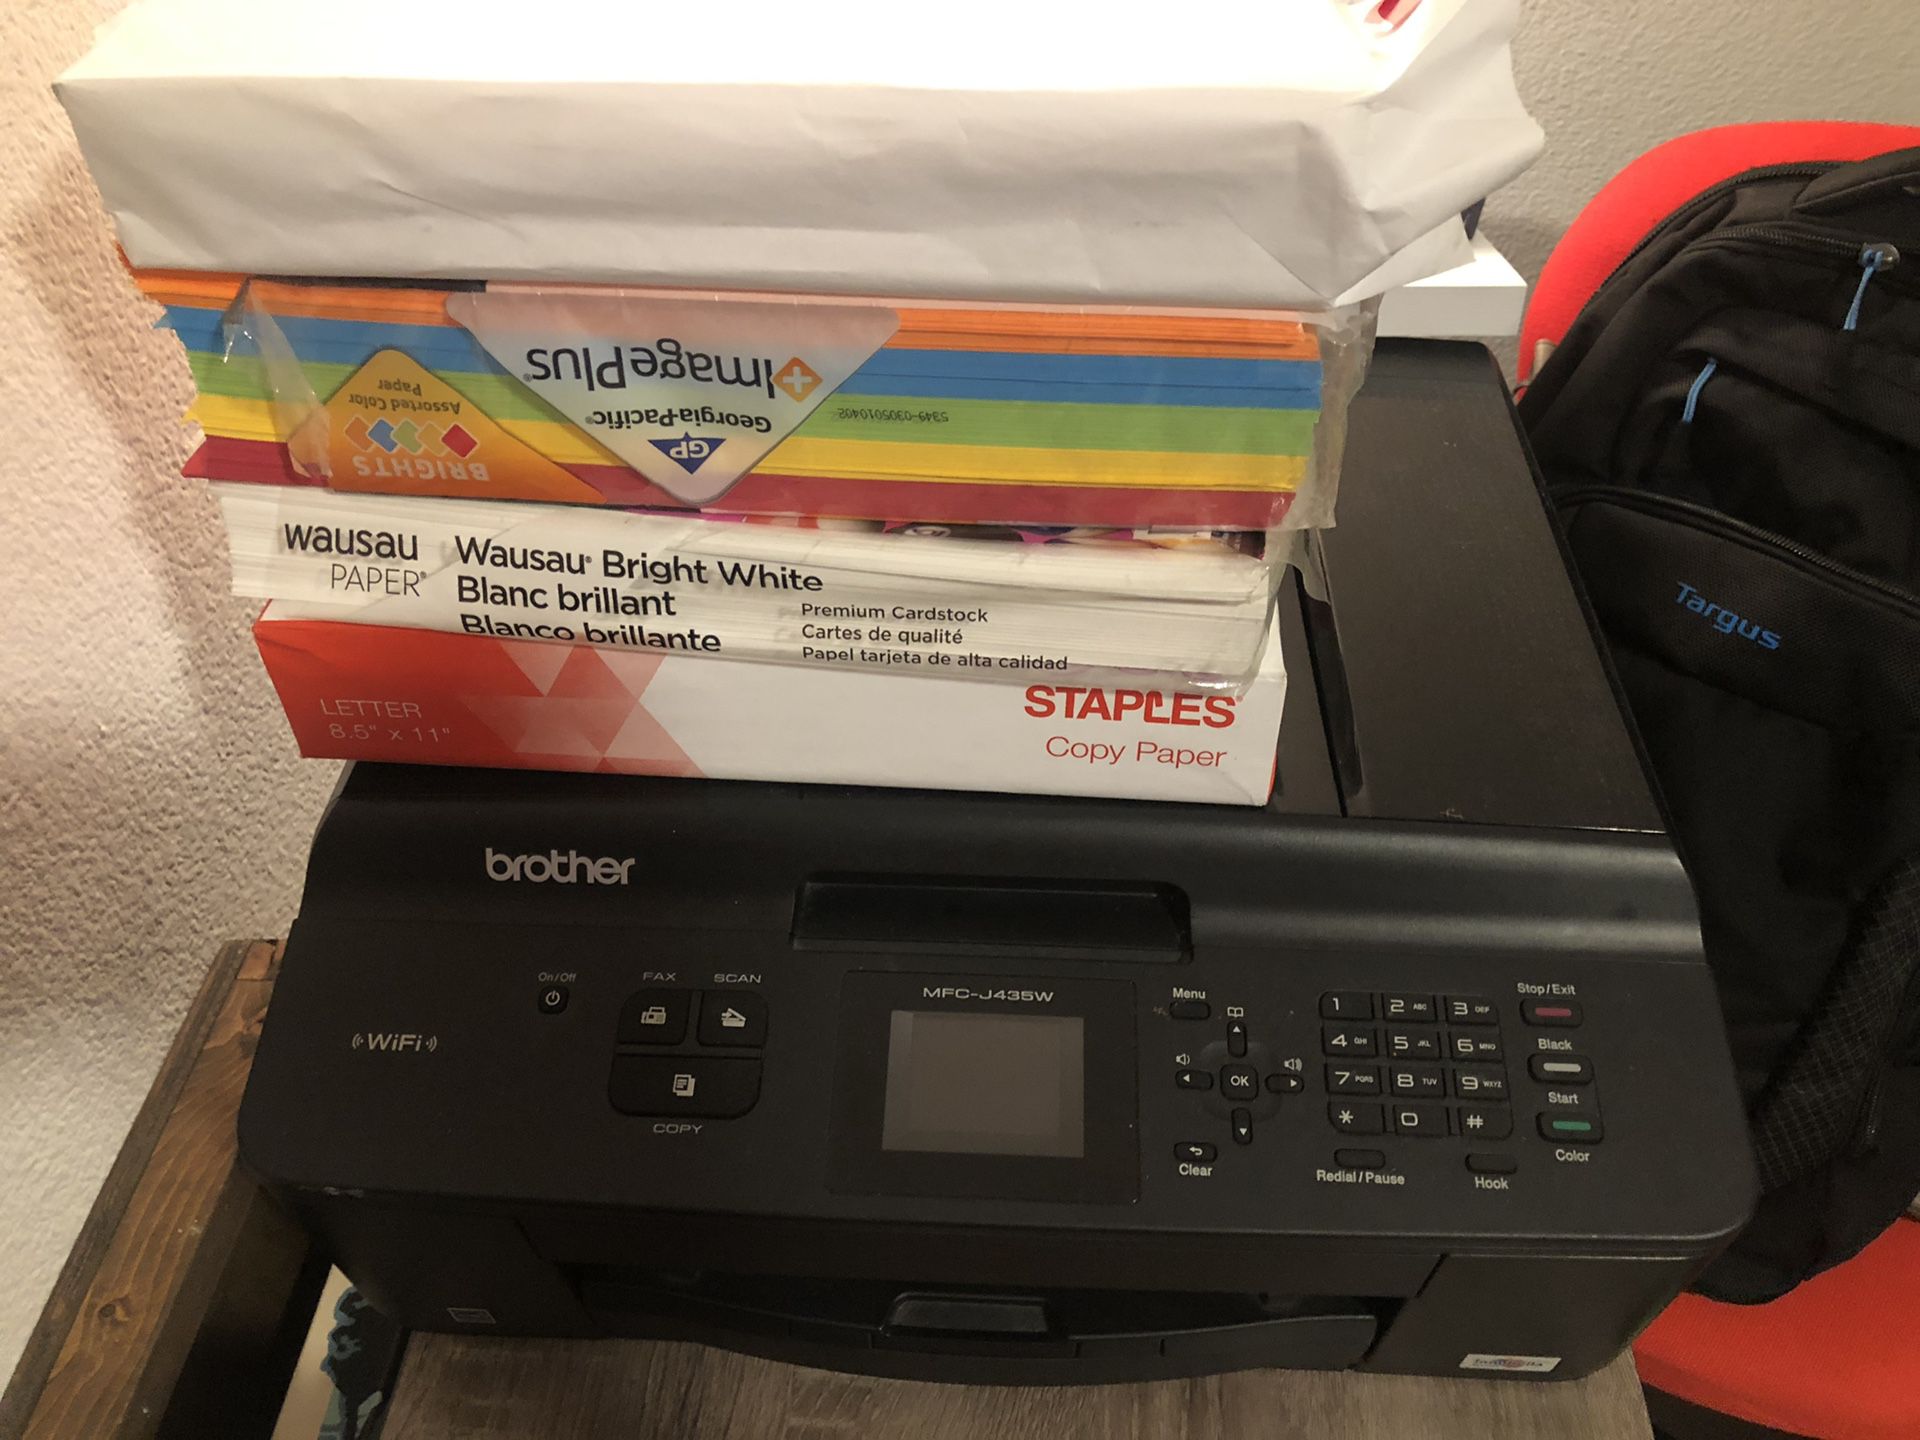 Brother colored printer, copier, scanner, and fax